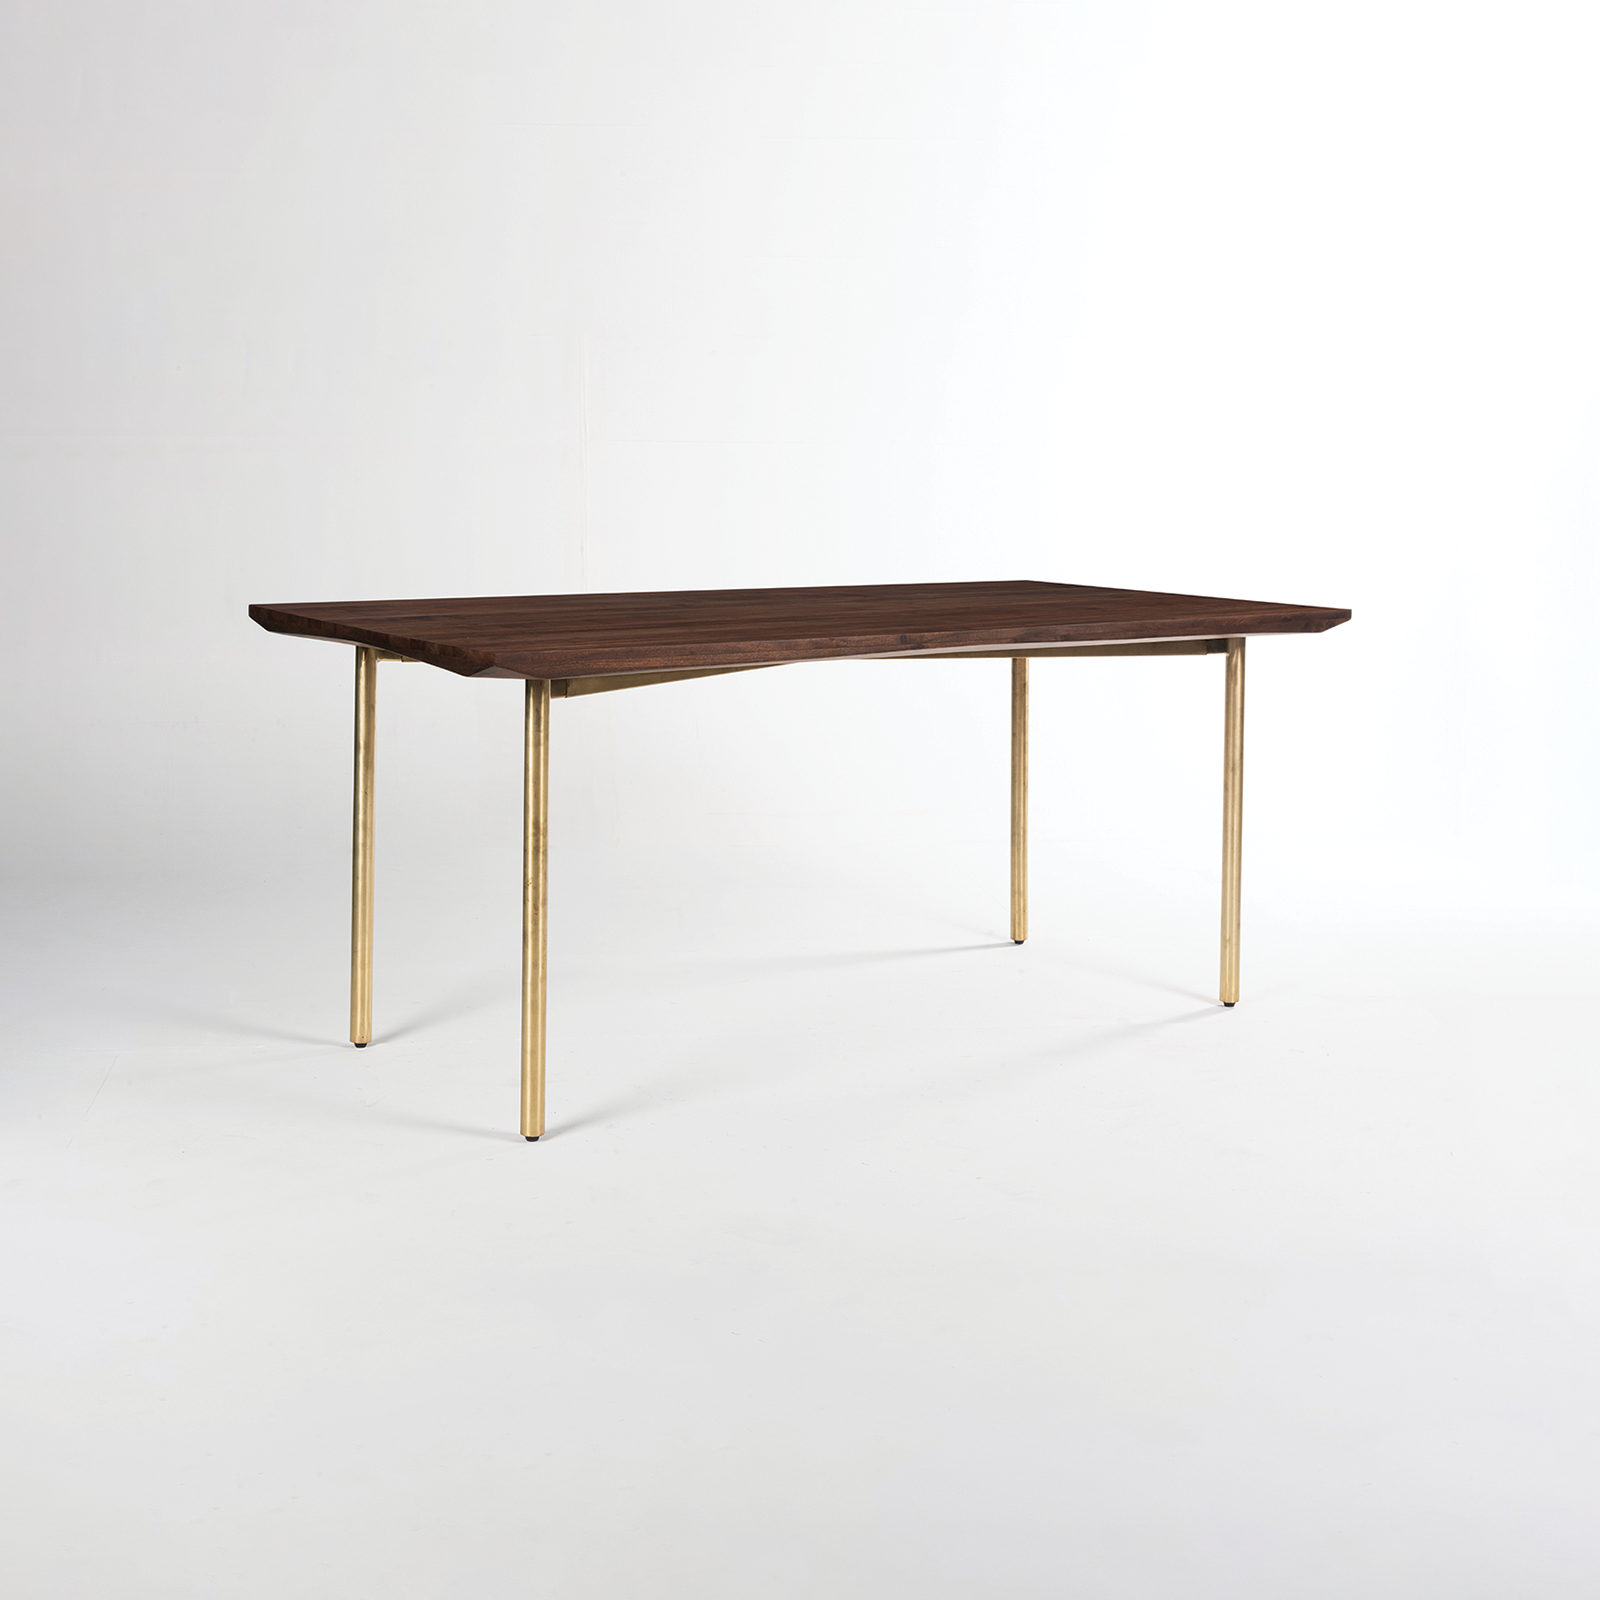 Barcelona Dining Table With 4 Without Arm and 2 Arms Chairs